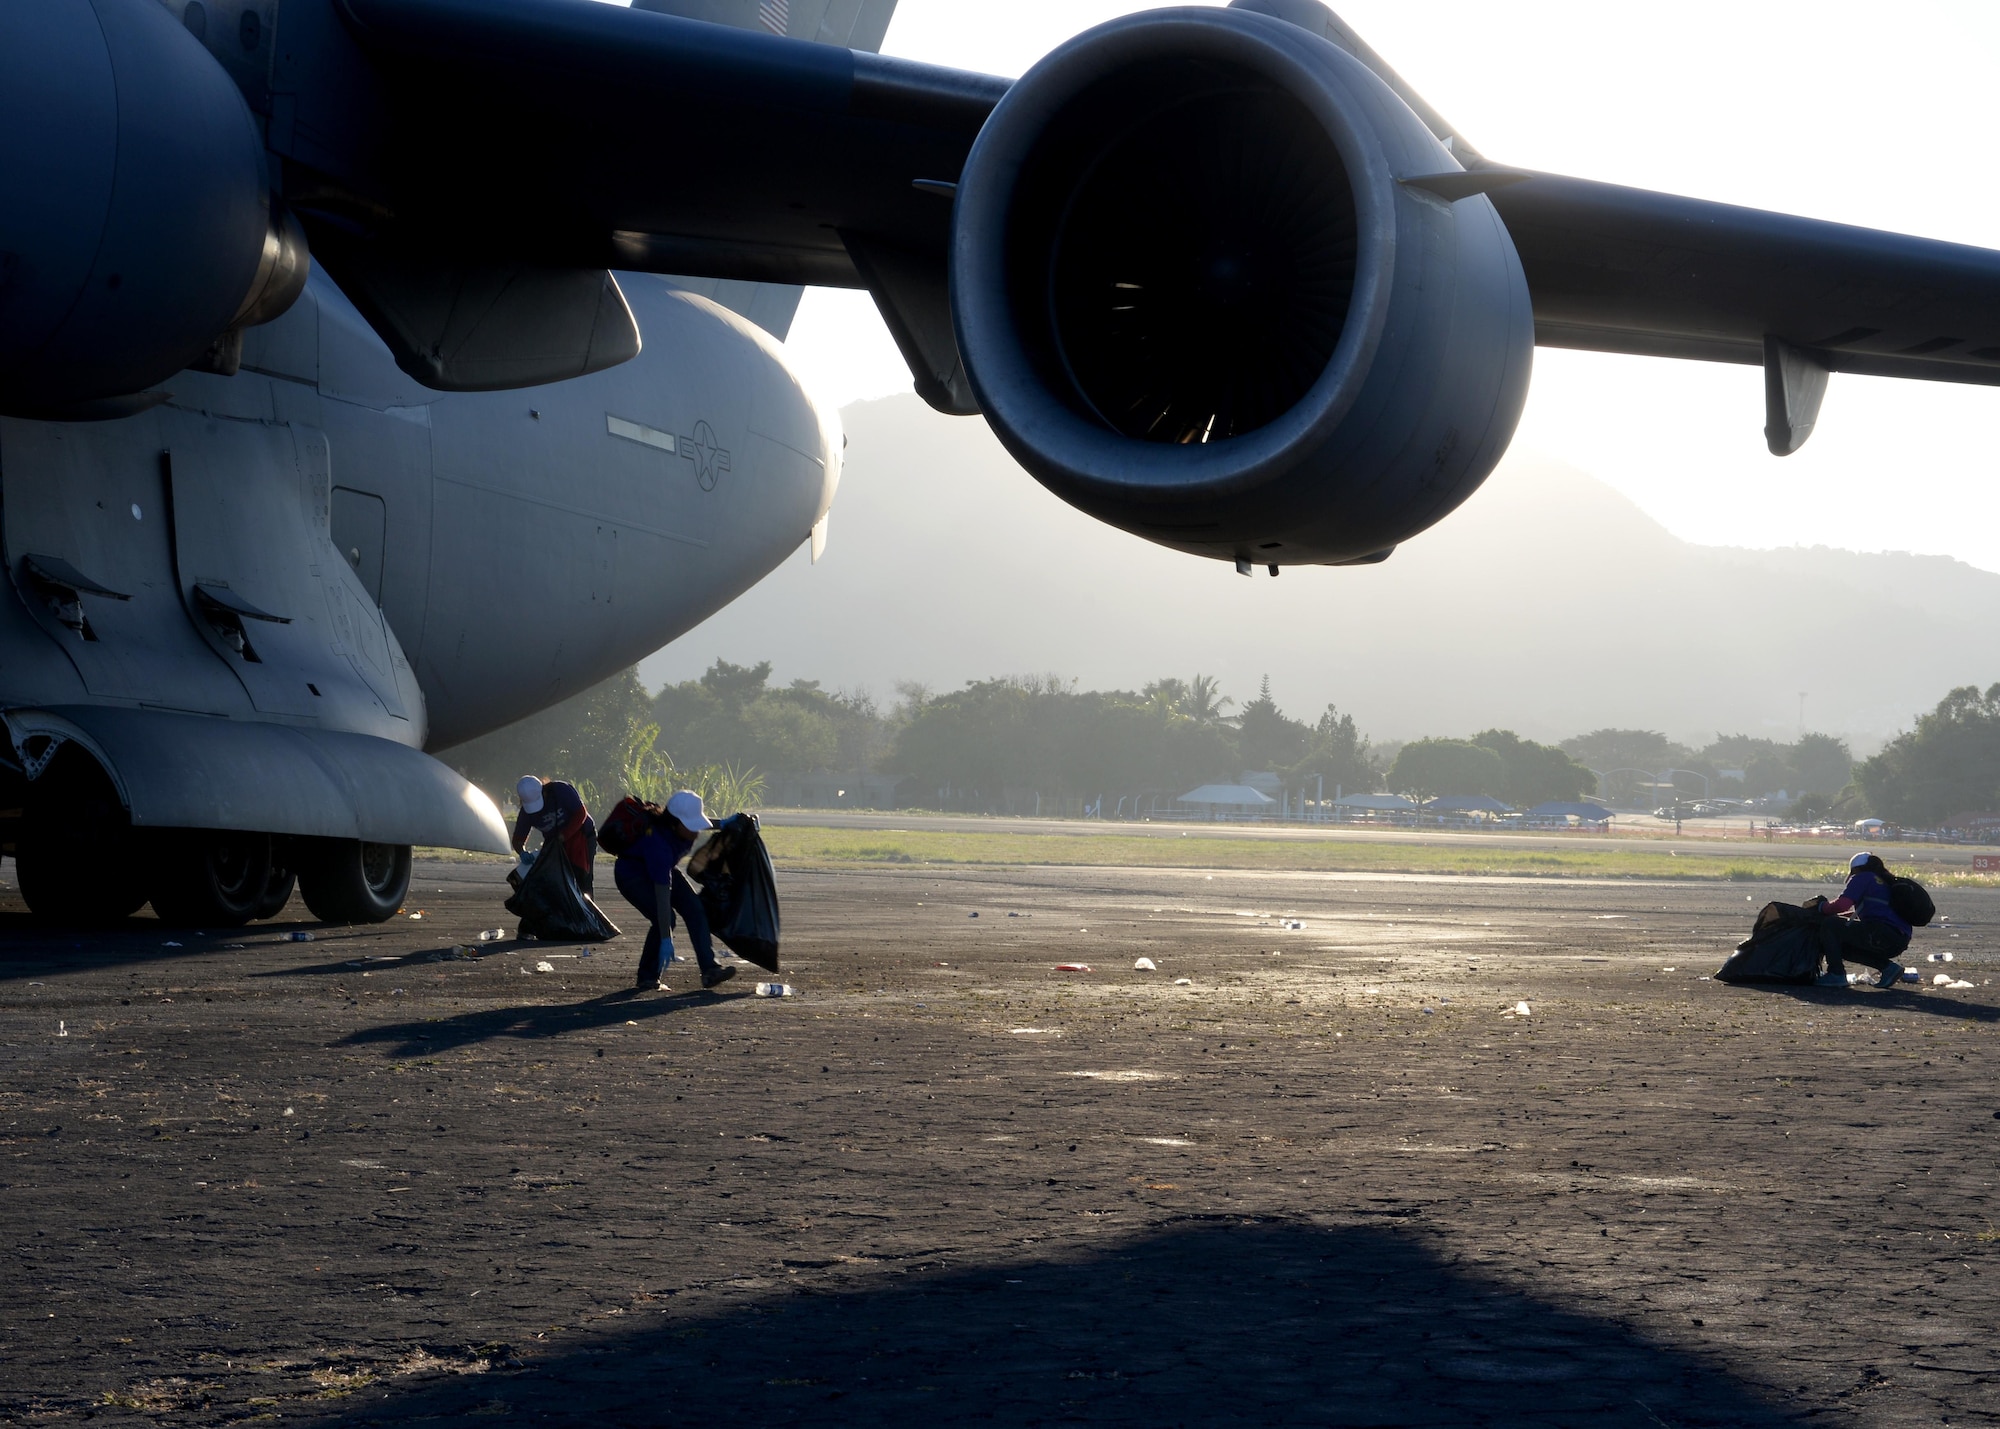 Ilopango Airshow staff, pick up trash around a U.S. Air Force C-17 Globemaster III cargo aircraft, 58th Airlift Squadron, prior to engine startup at Ilopango International Airport in San Salvador, El Savador, Jan. 30, during the 2016 Ilopango Airshow. The C-17 was sent from Altus Air Force Base, Okla., to foster relationships between the U.S. and El Salvador. The aircraft was setup as a static display for the attendees to view and learn about some of its capabilities. (U.S. Air Force photo by Senior Airman Franklin R. Ramos/Released)